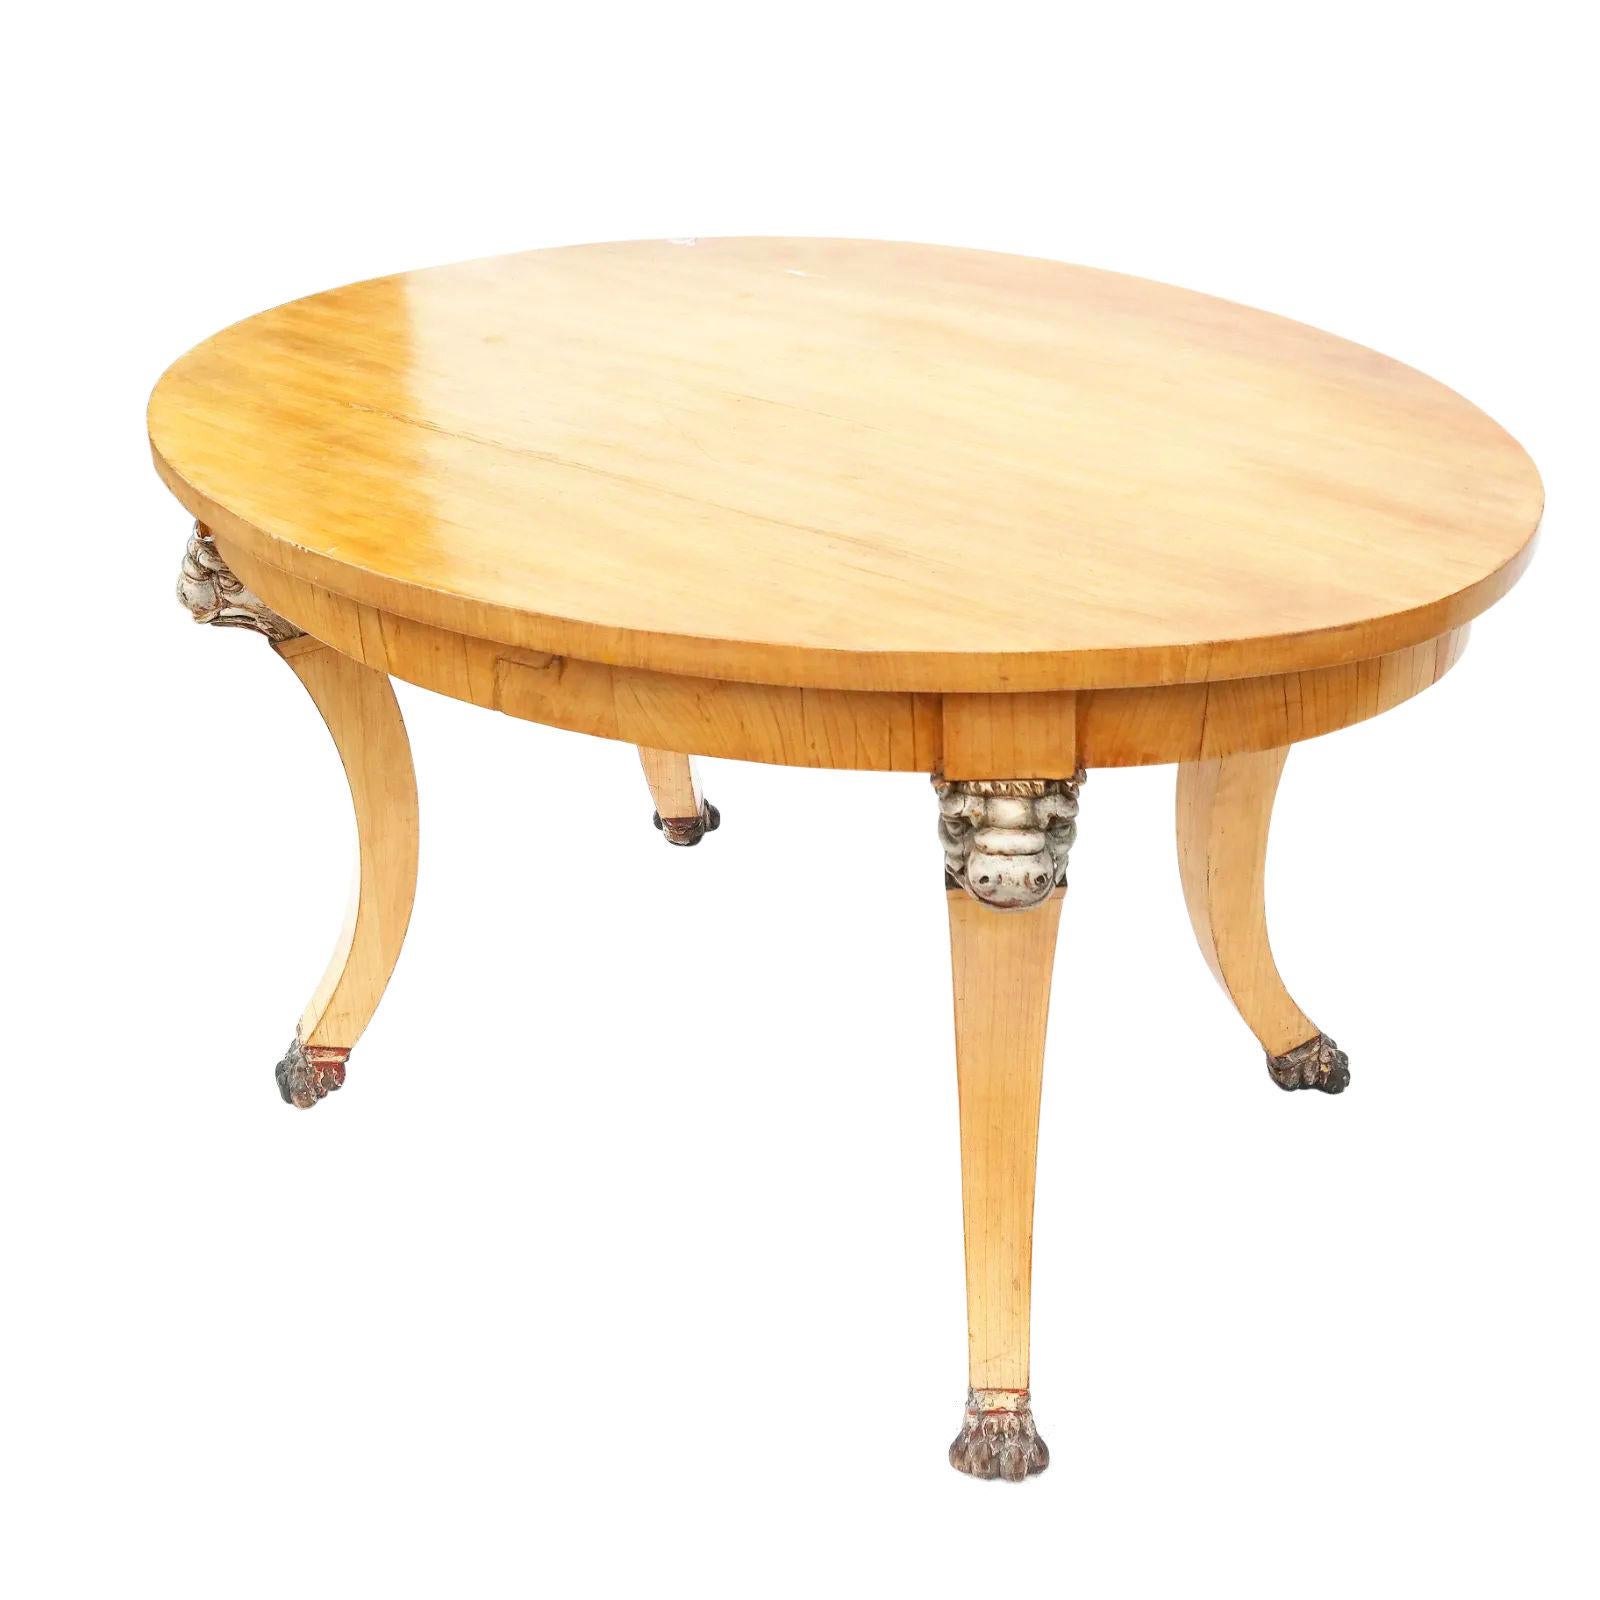 Our Russian Empire period oval table with birch veneer with silver gilt eagle-mounted legs and paw feet measures 35 by 49.5 inches and 30 inches tall. Provenance: Jay Waldmann, Waldmann Inc., Southampton, NY.
     